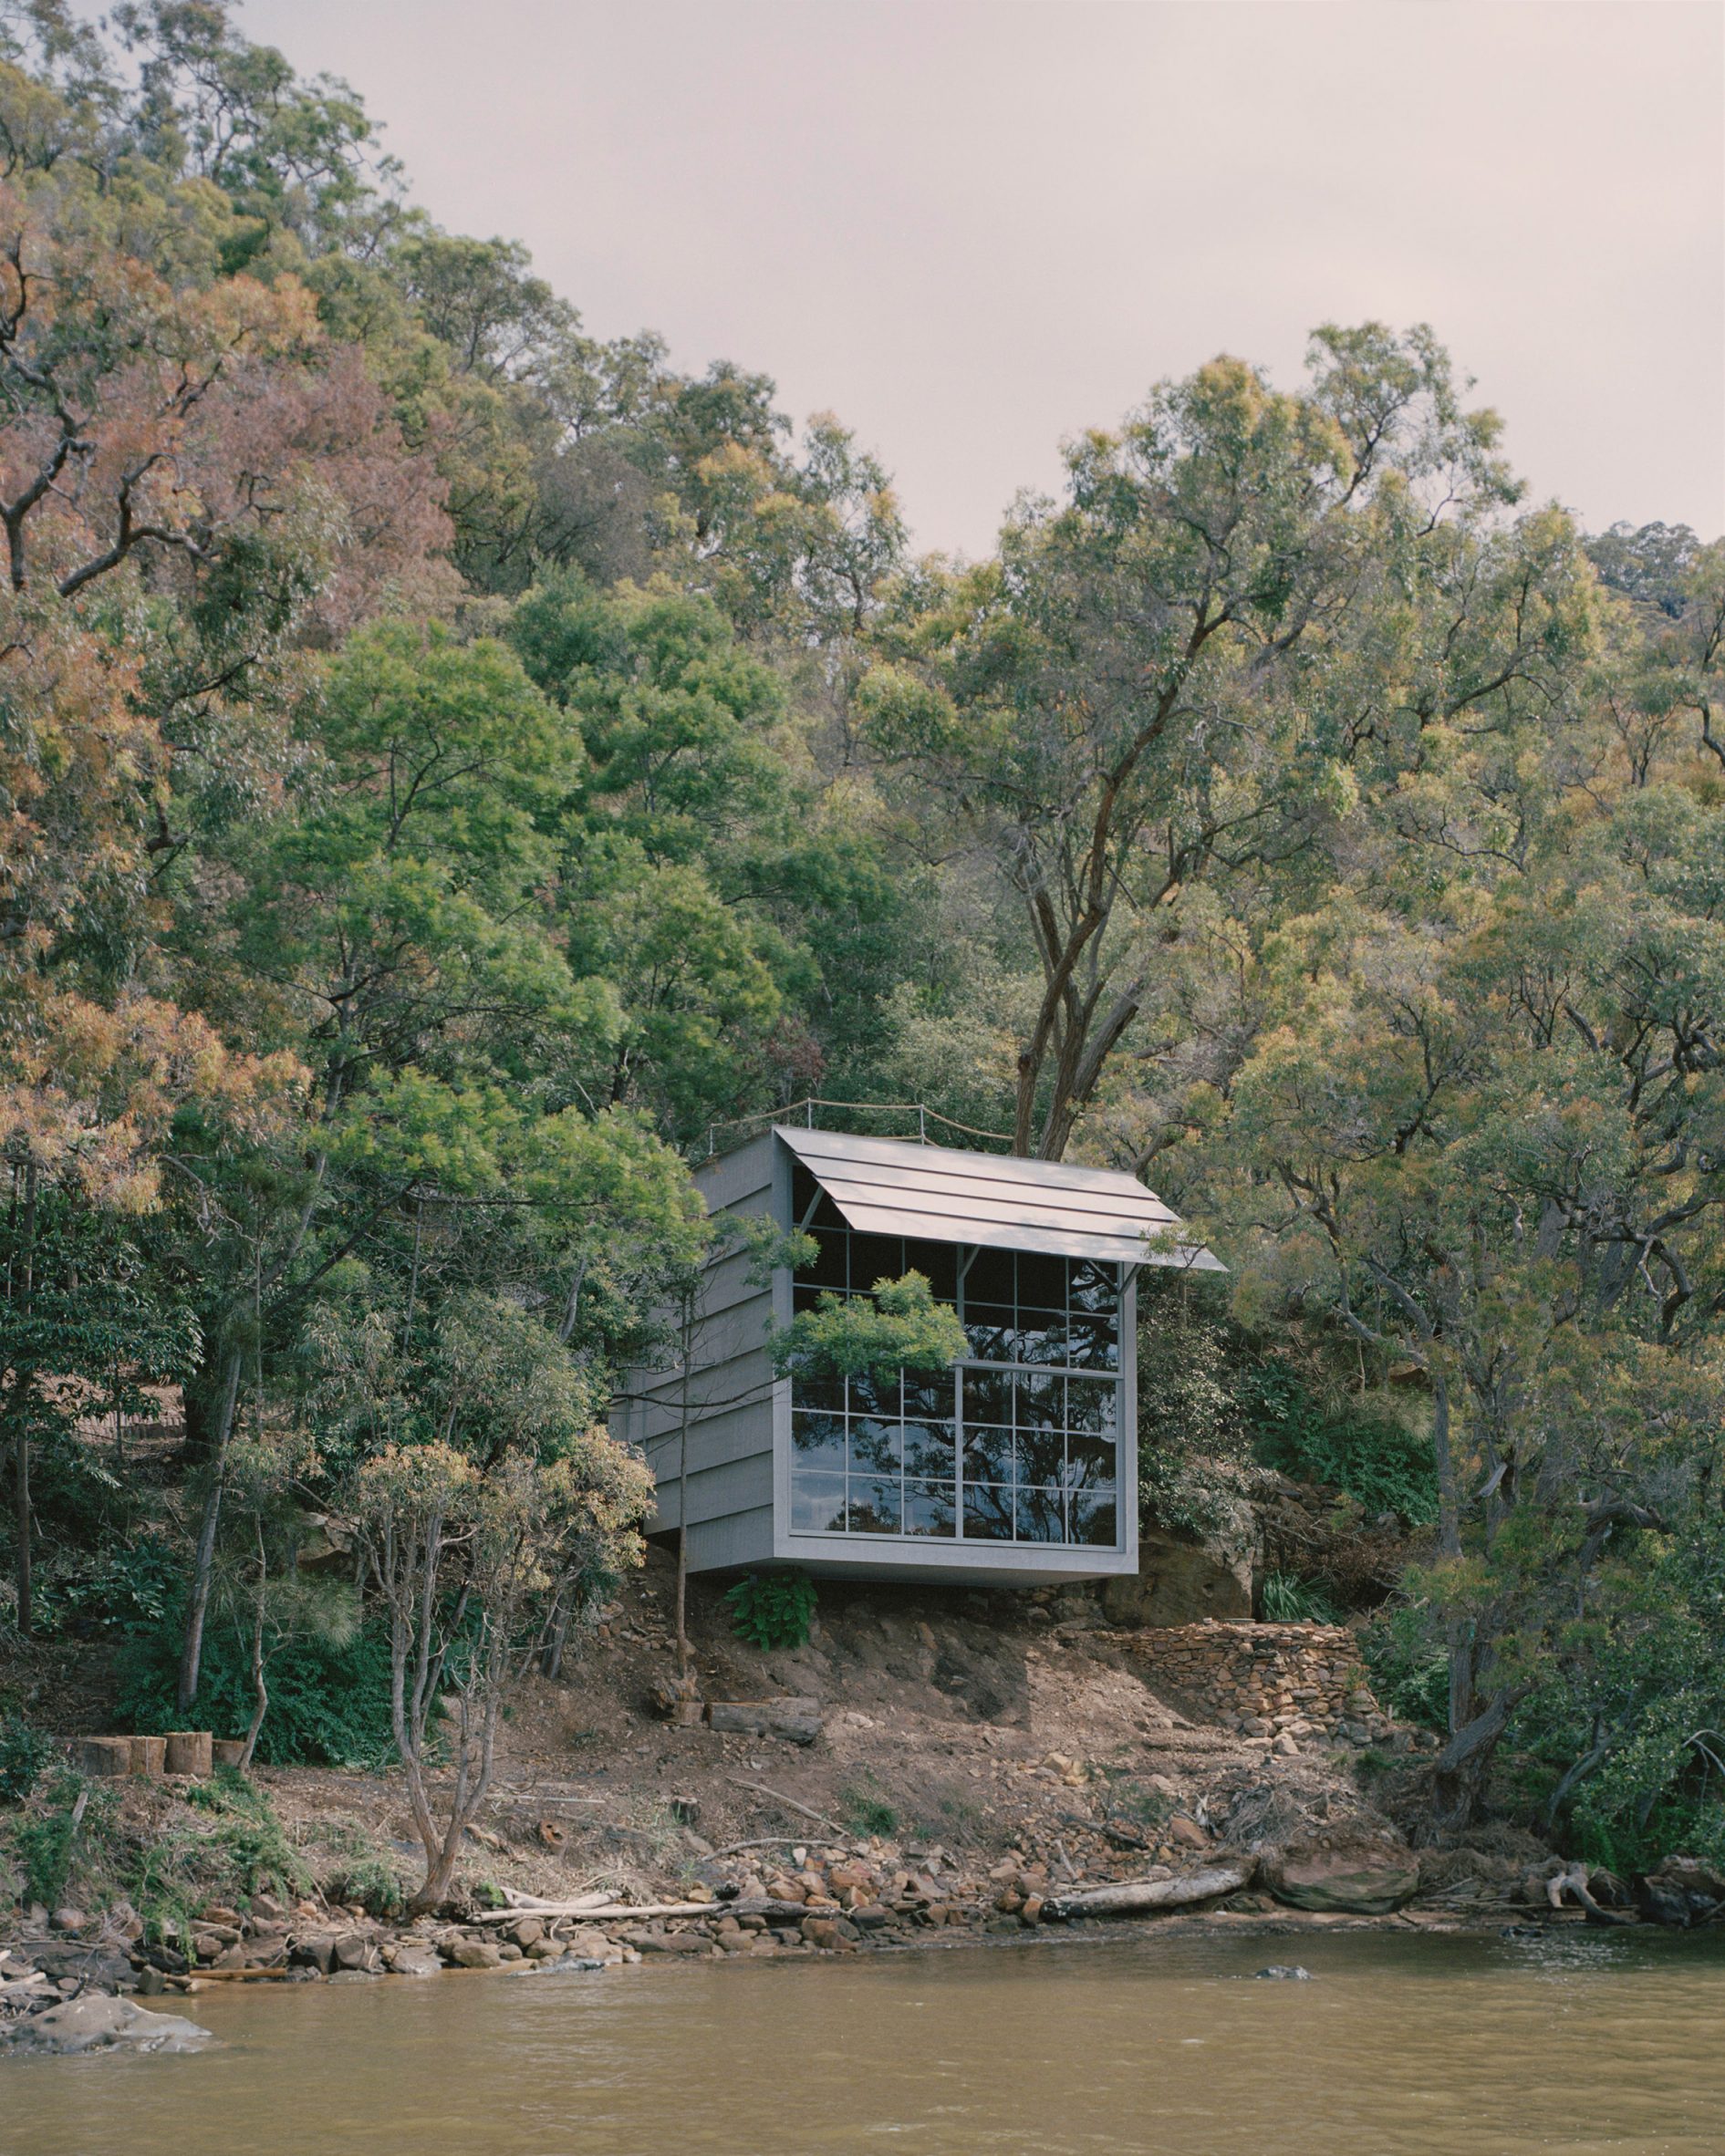 The Marramarra Shack is pictured in front of a creek